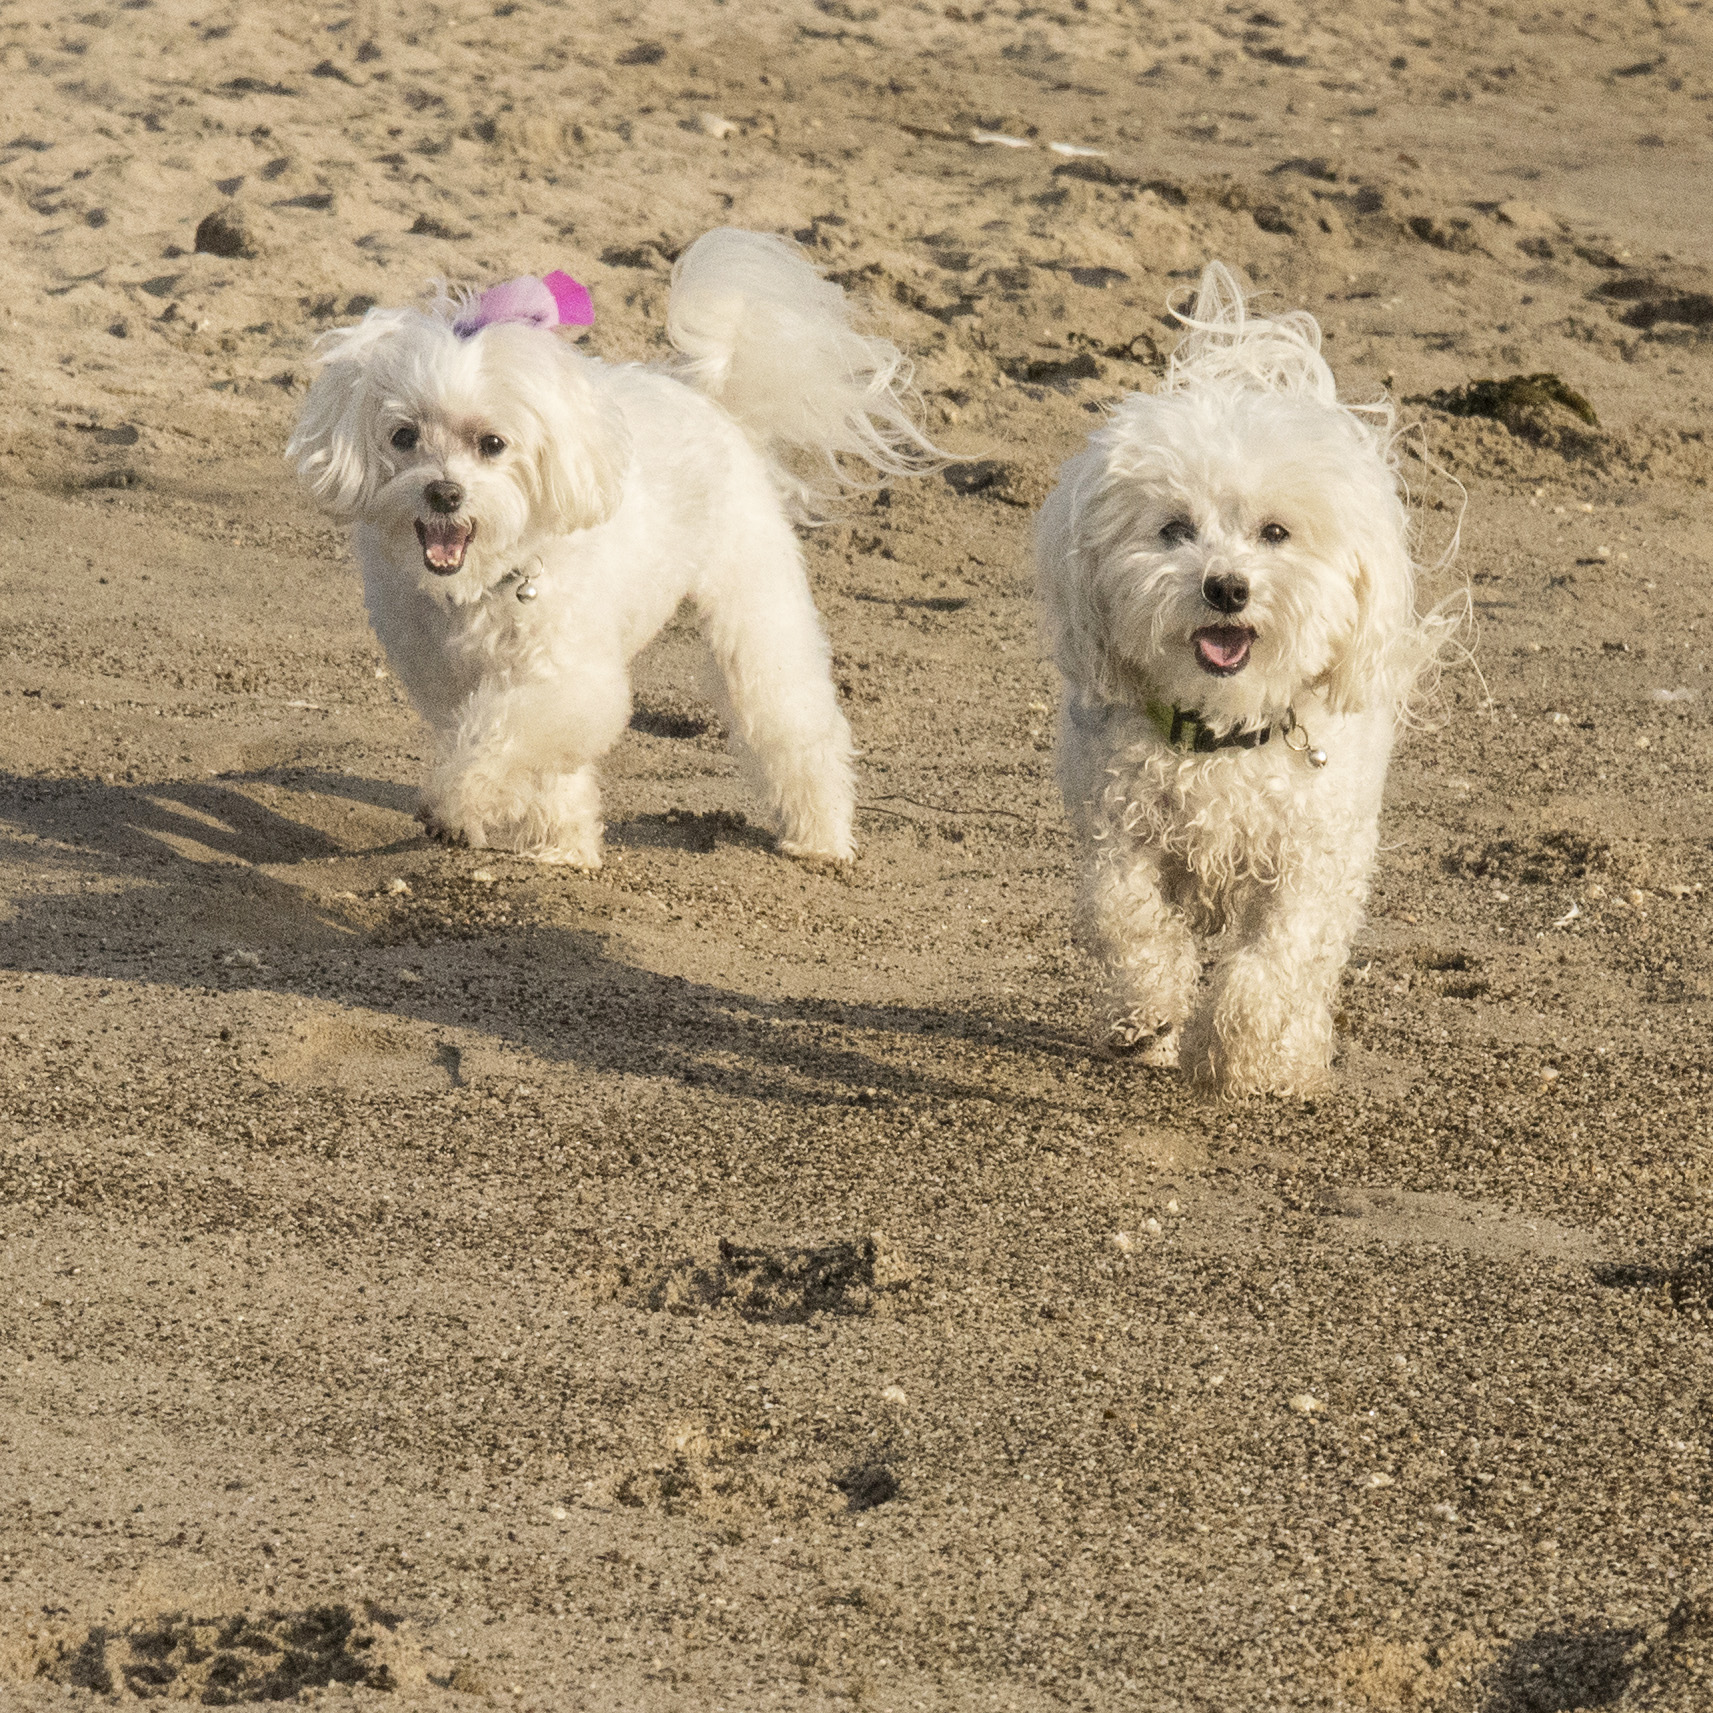  Pebbles may not want to be down by the water, but that doesn’t mean she won’t have fun on the beach with her brother! 